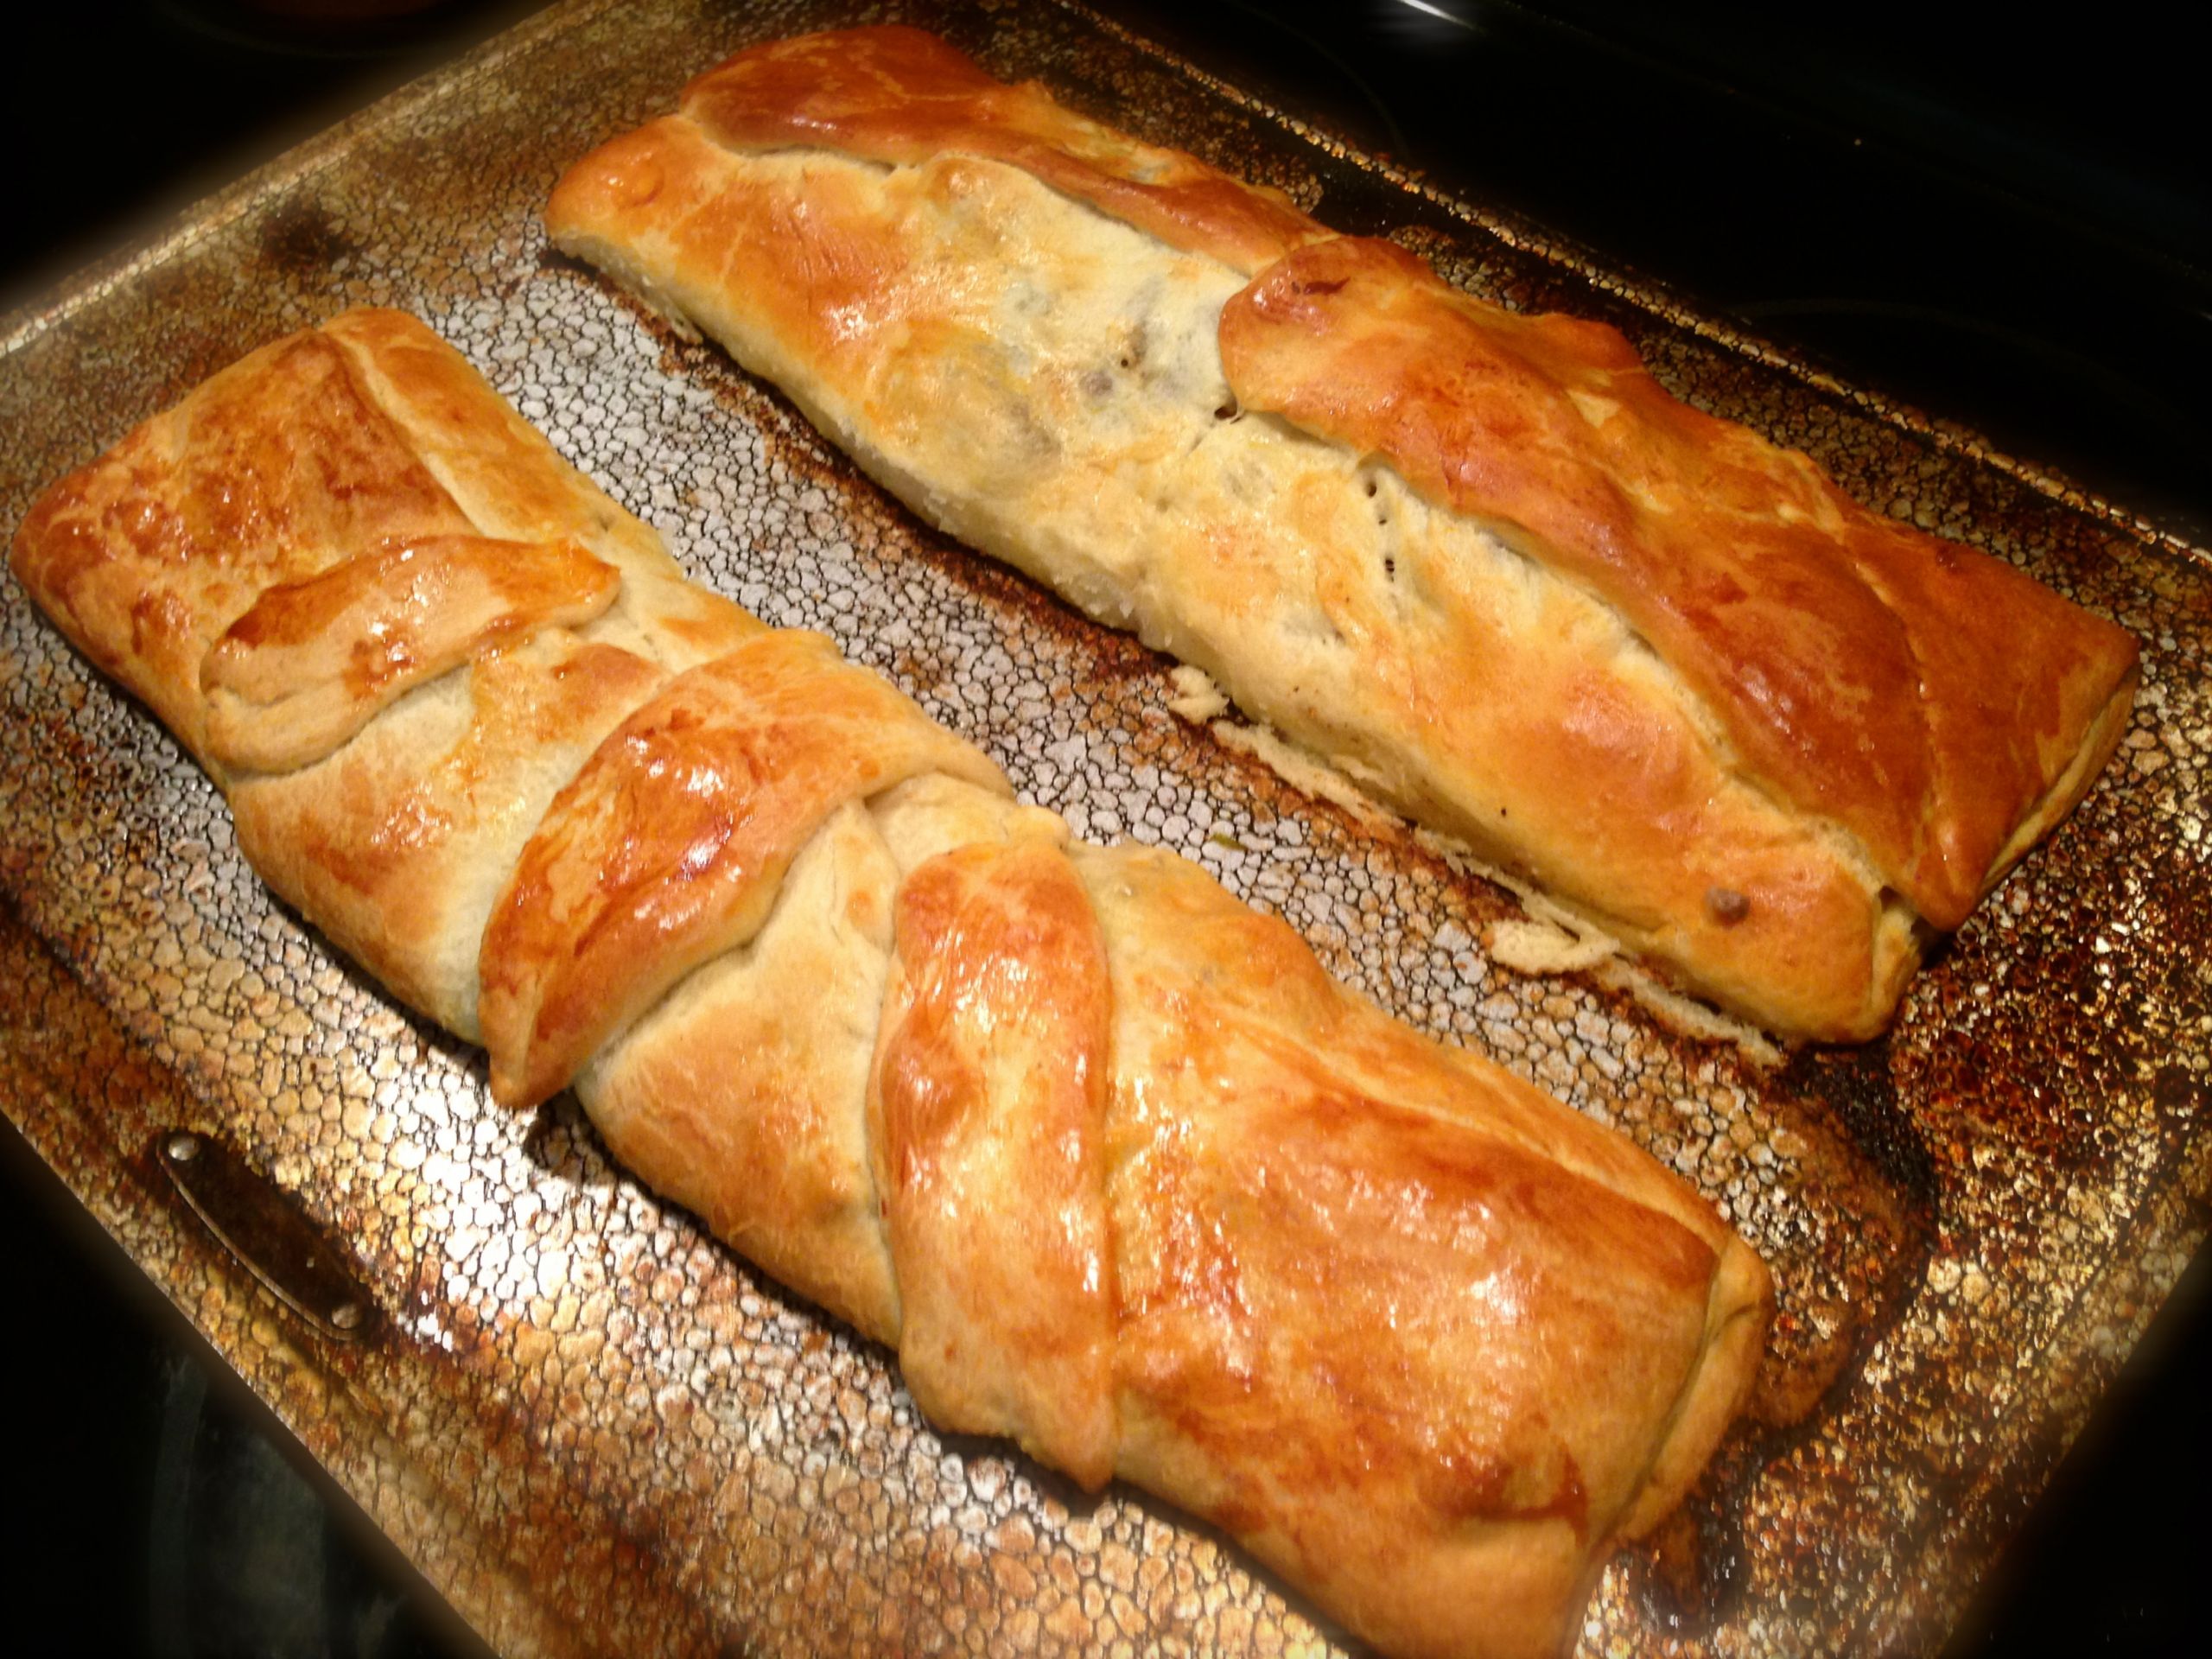 Crescent Roll Recipes with Ground Beef Inspirational Recipe with Crescent Rolls and Ground Beef